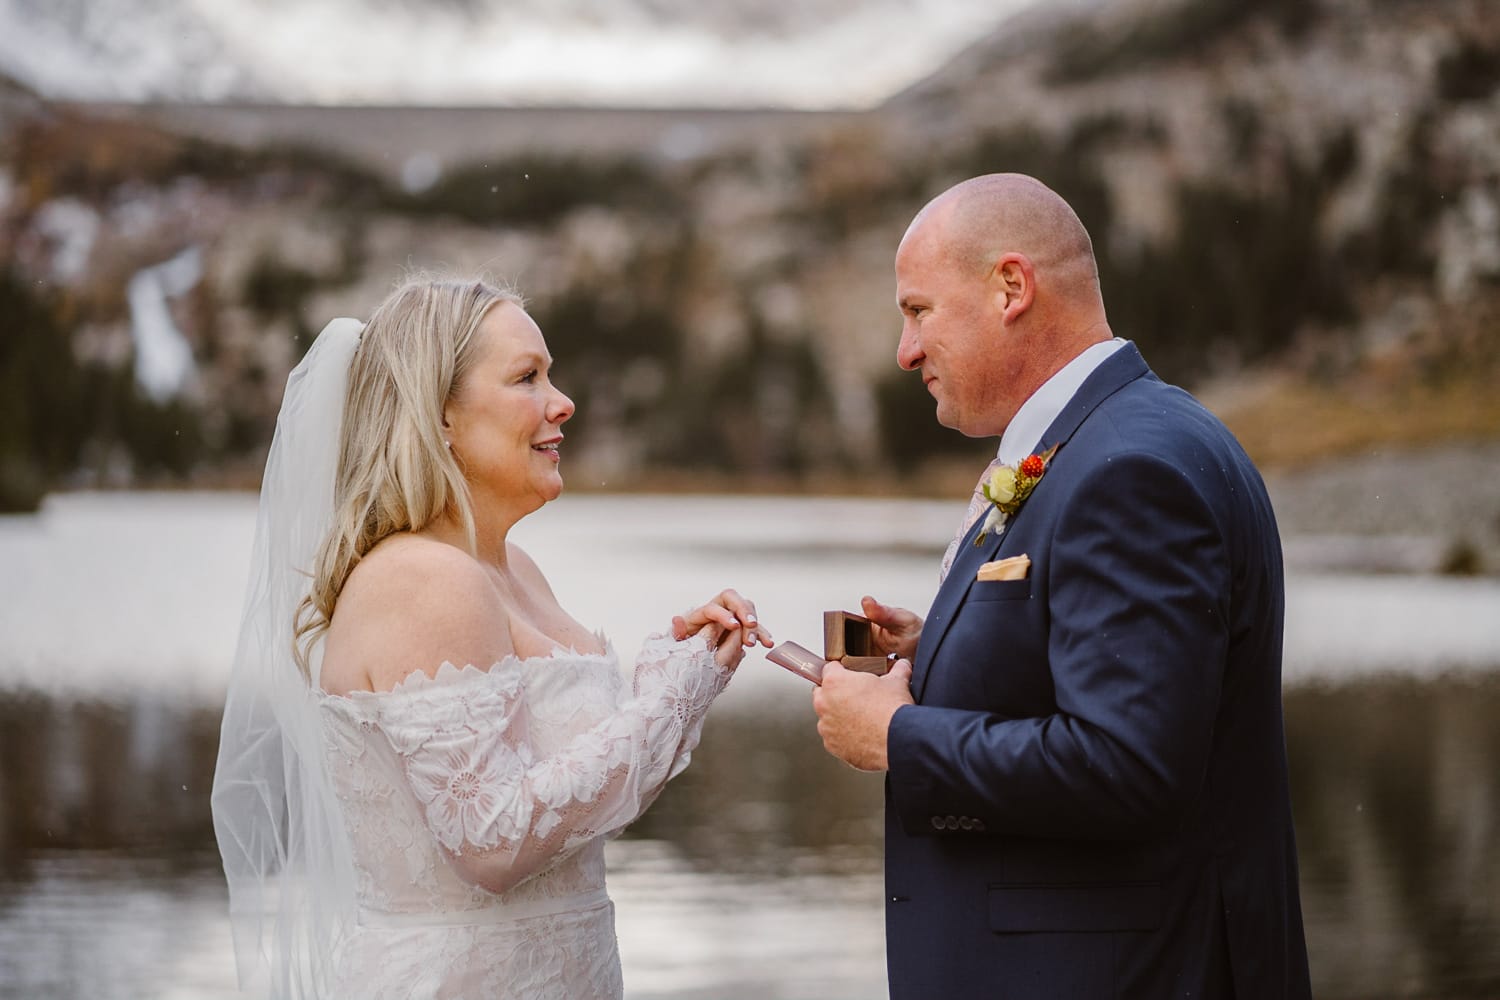 Couple sharing rings after their Self-Solemnization elopement in Colorado.